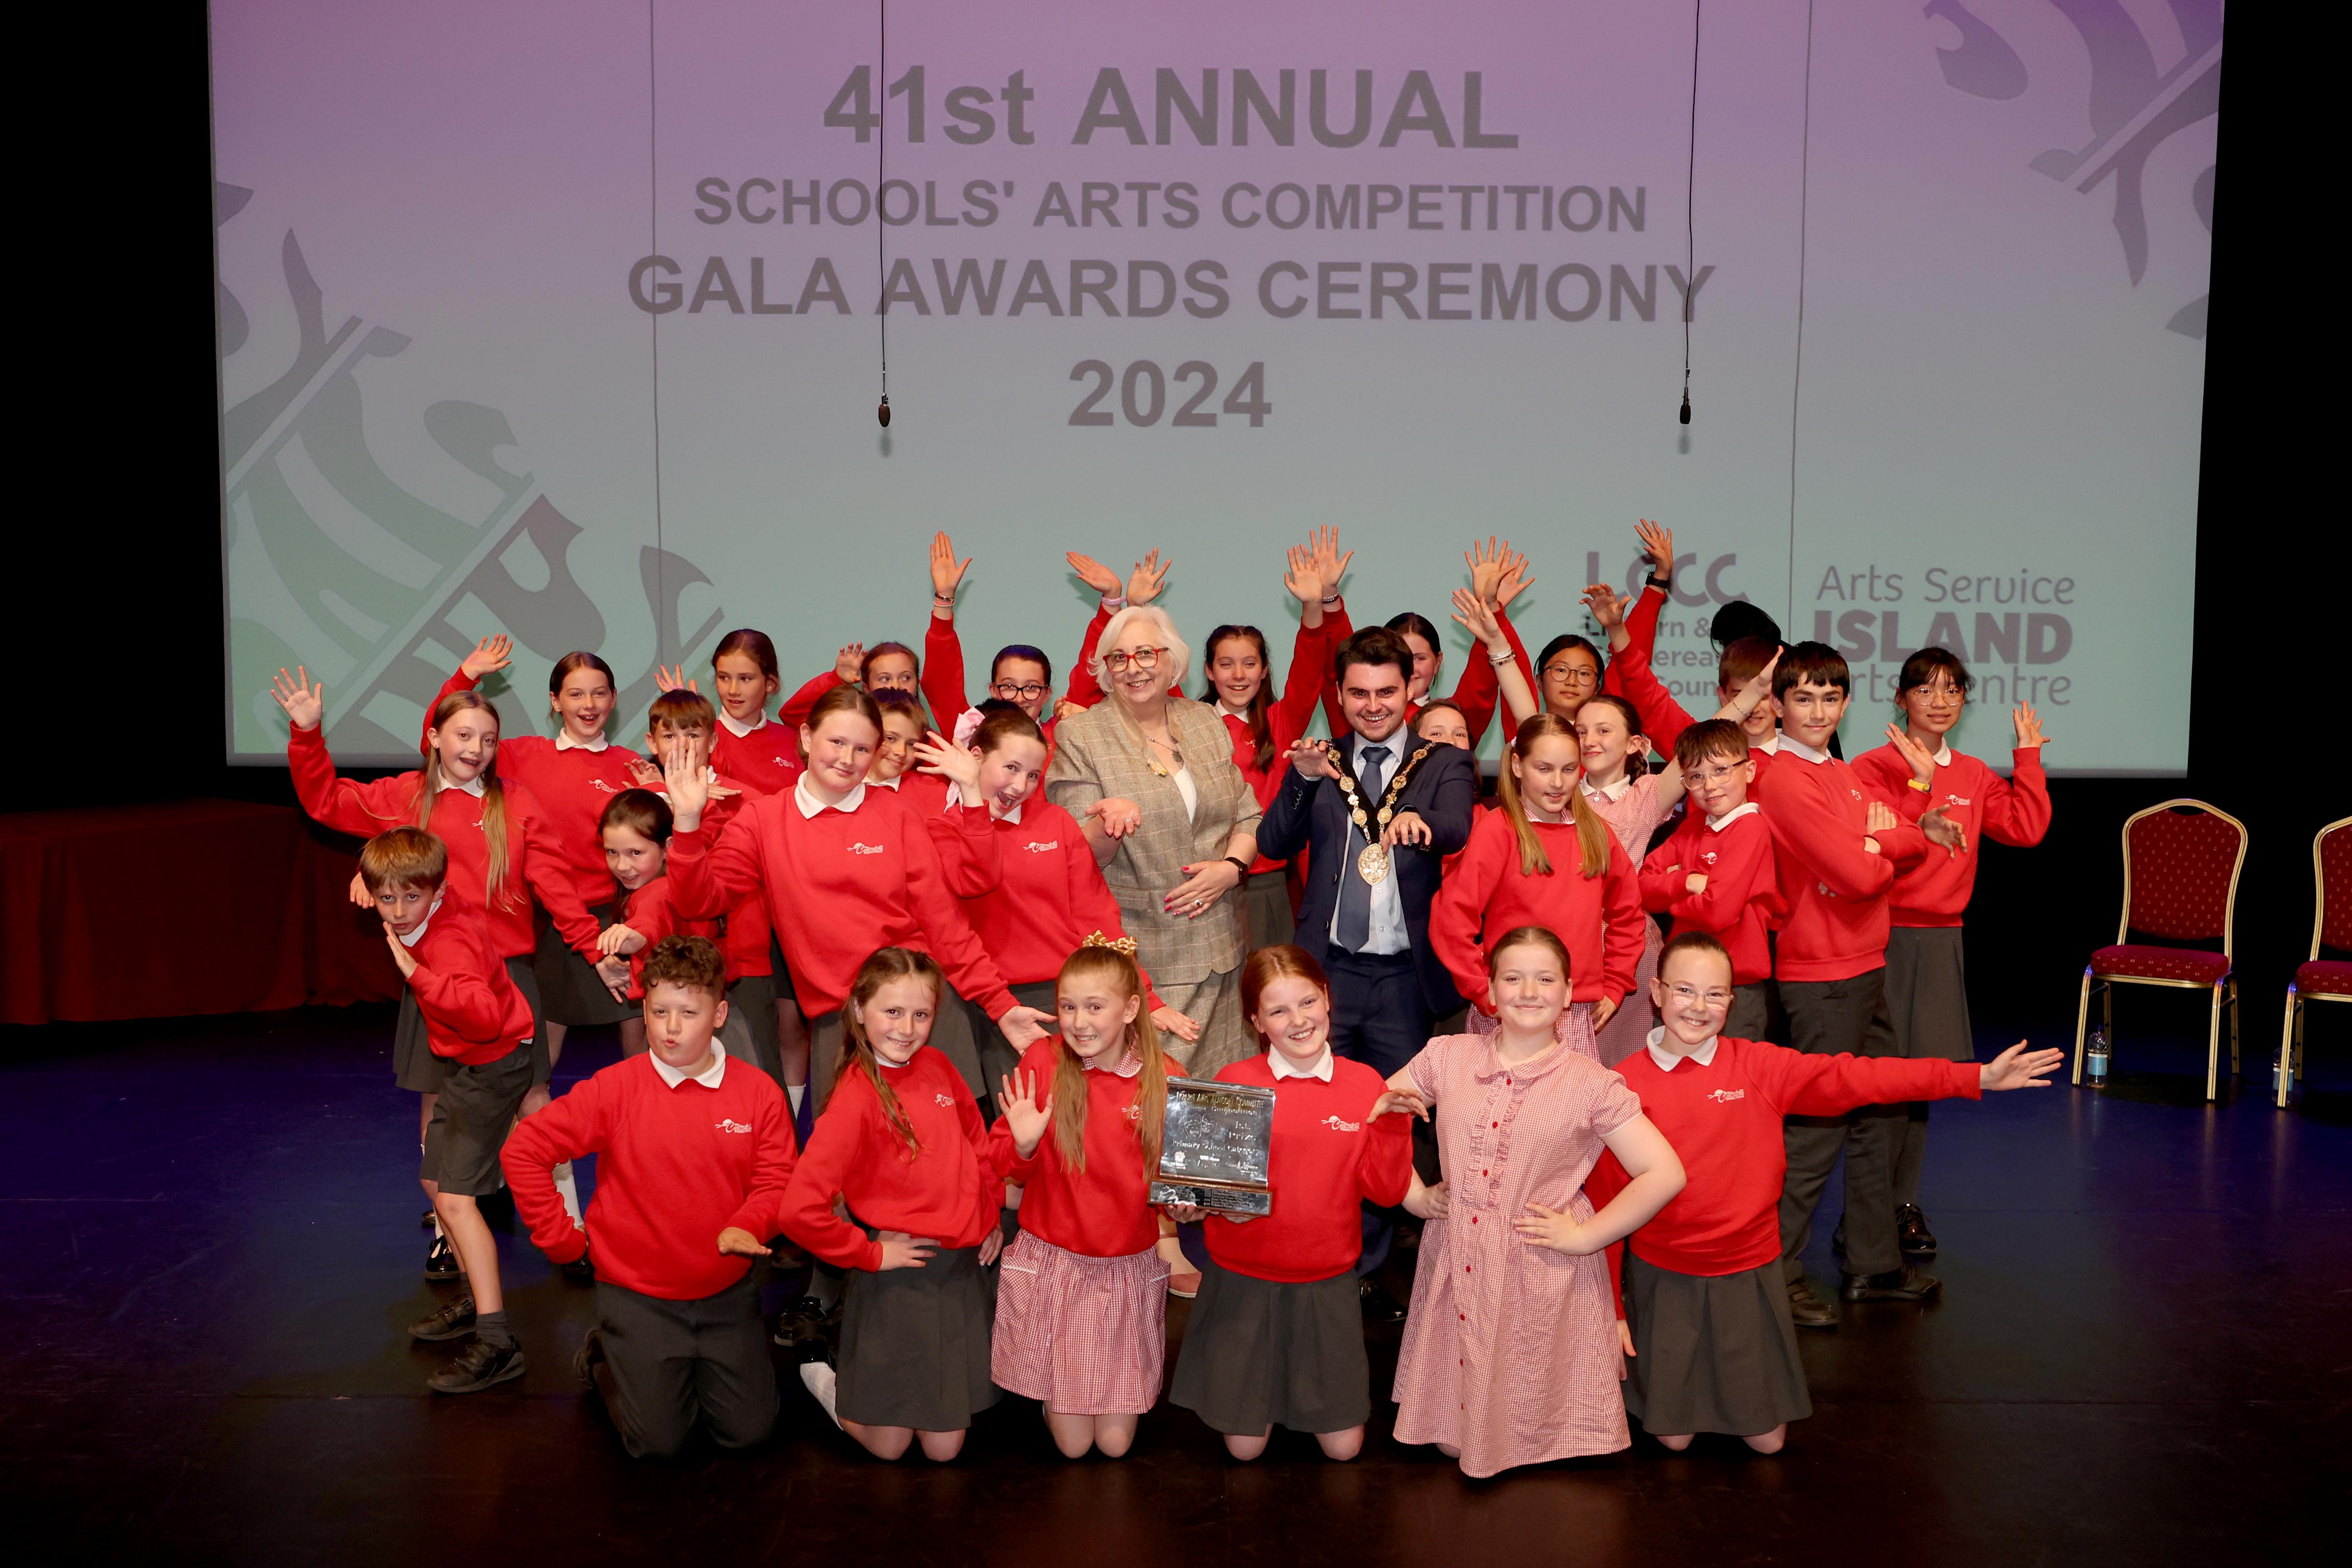 41st Annual Schools’ Arts Competition